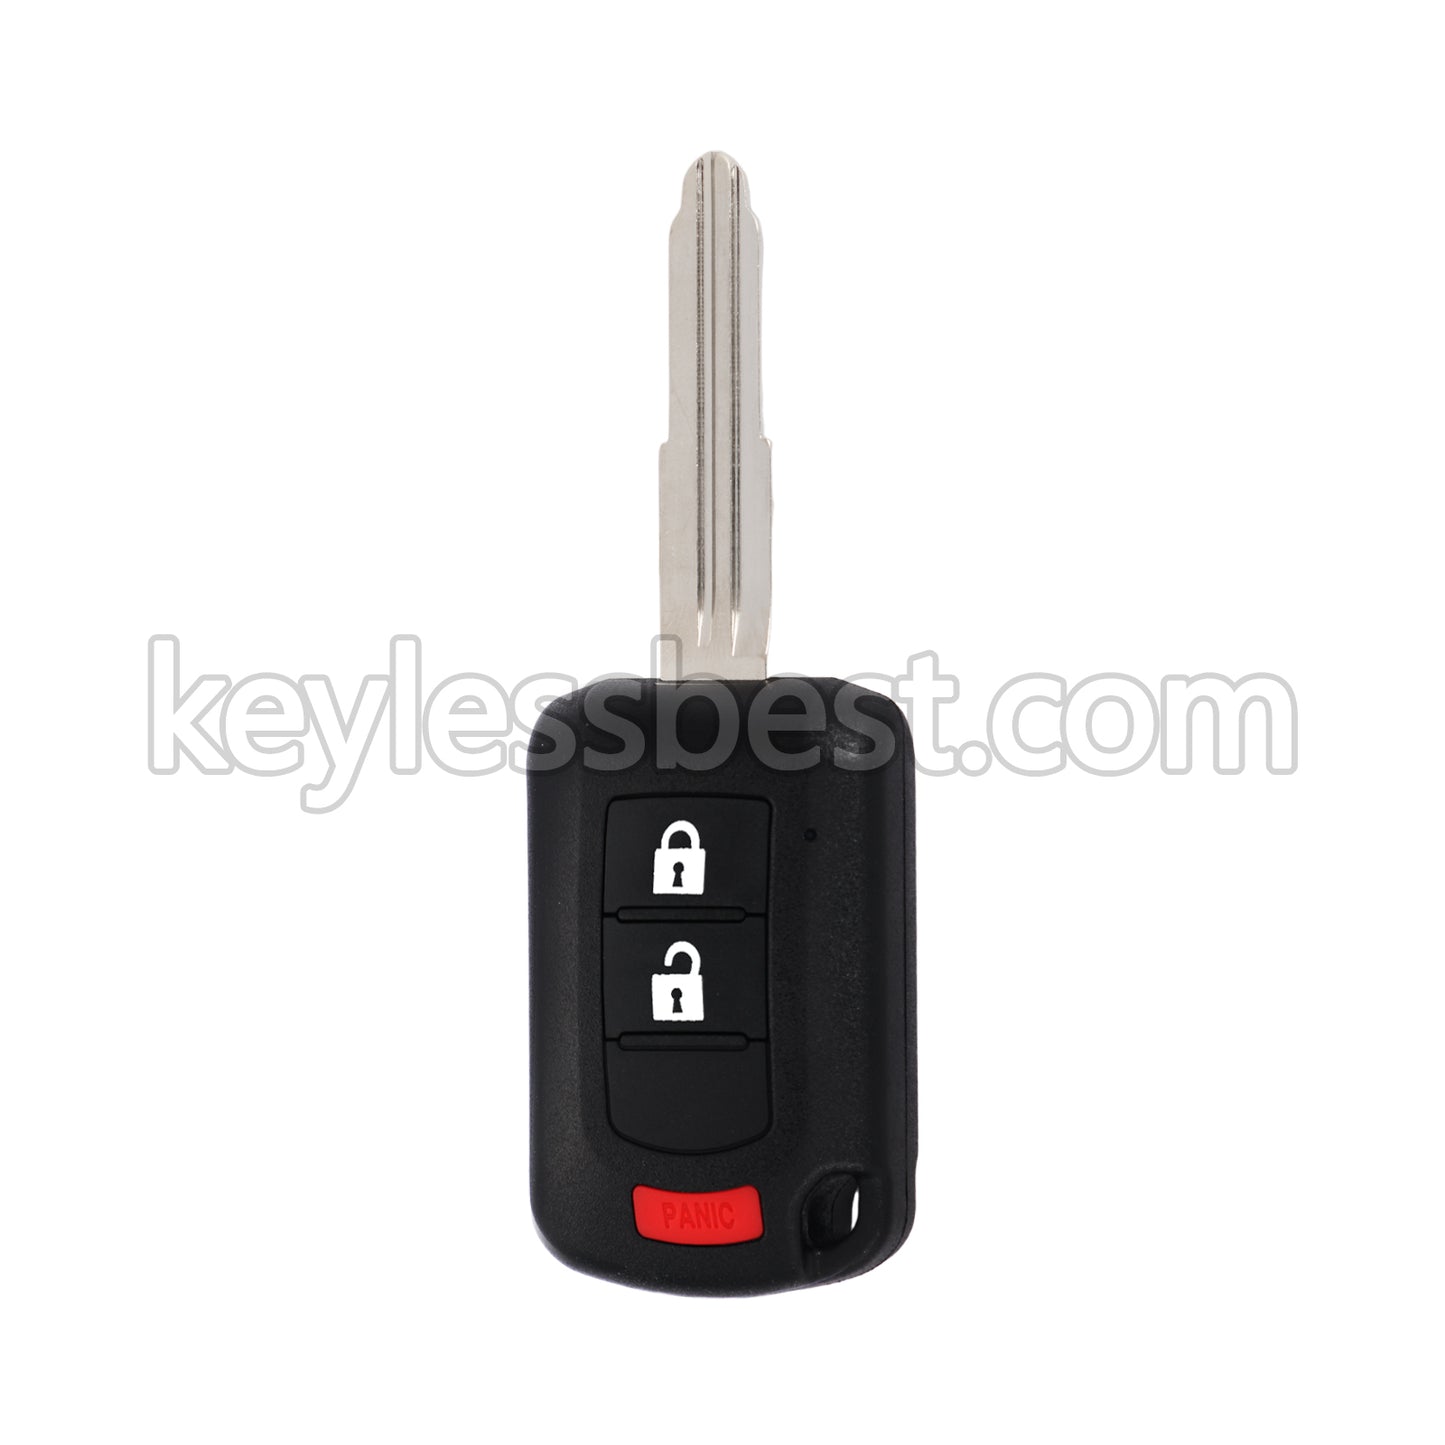 2018 - 2020 Mitsubishi Eclipse Cross / 3 Buttons Remote Key / OUCJ166N / 315MHz